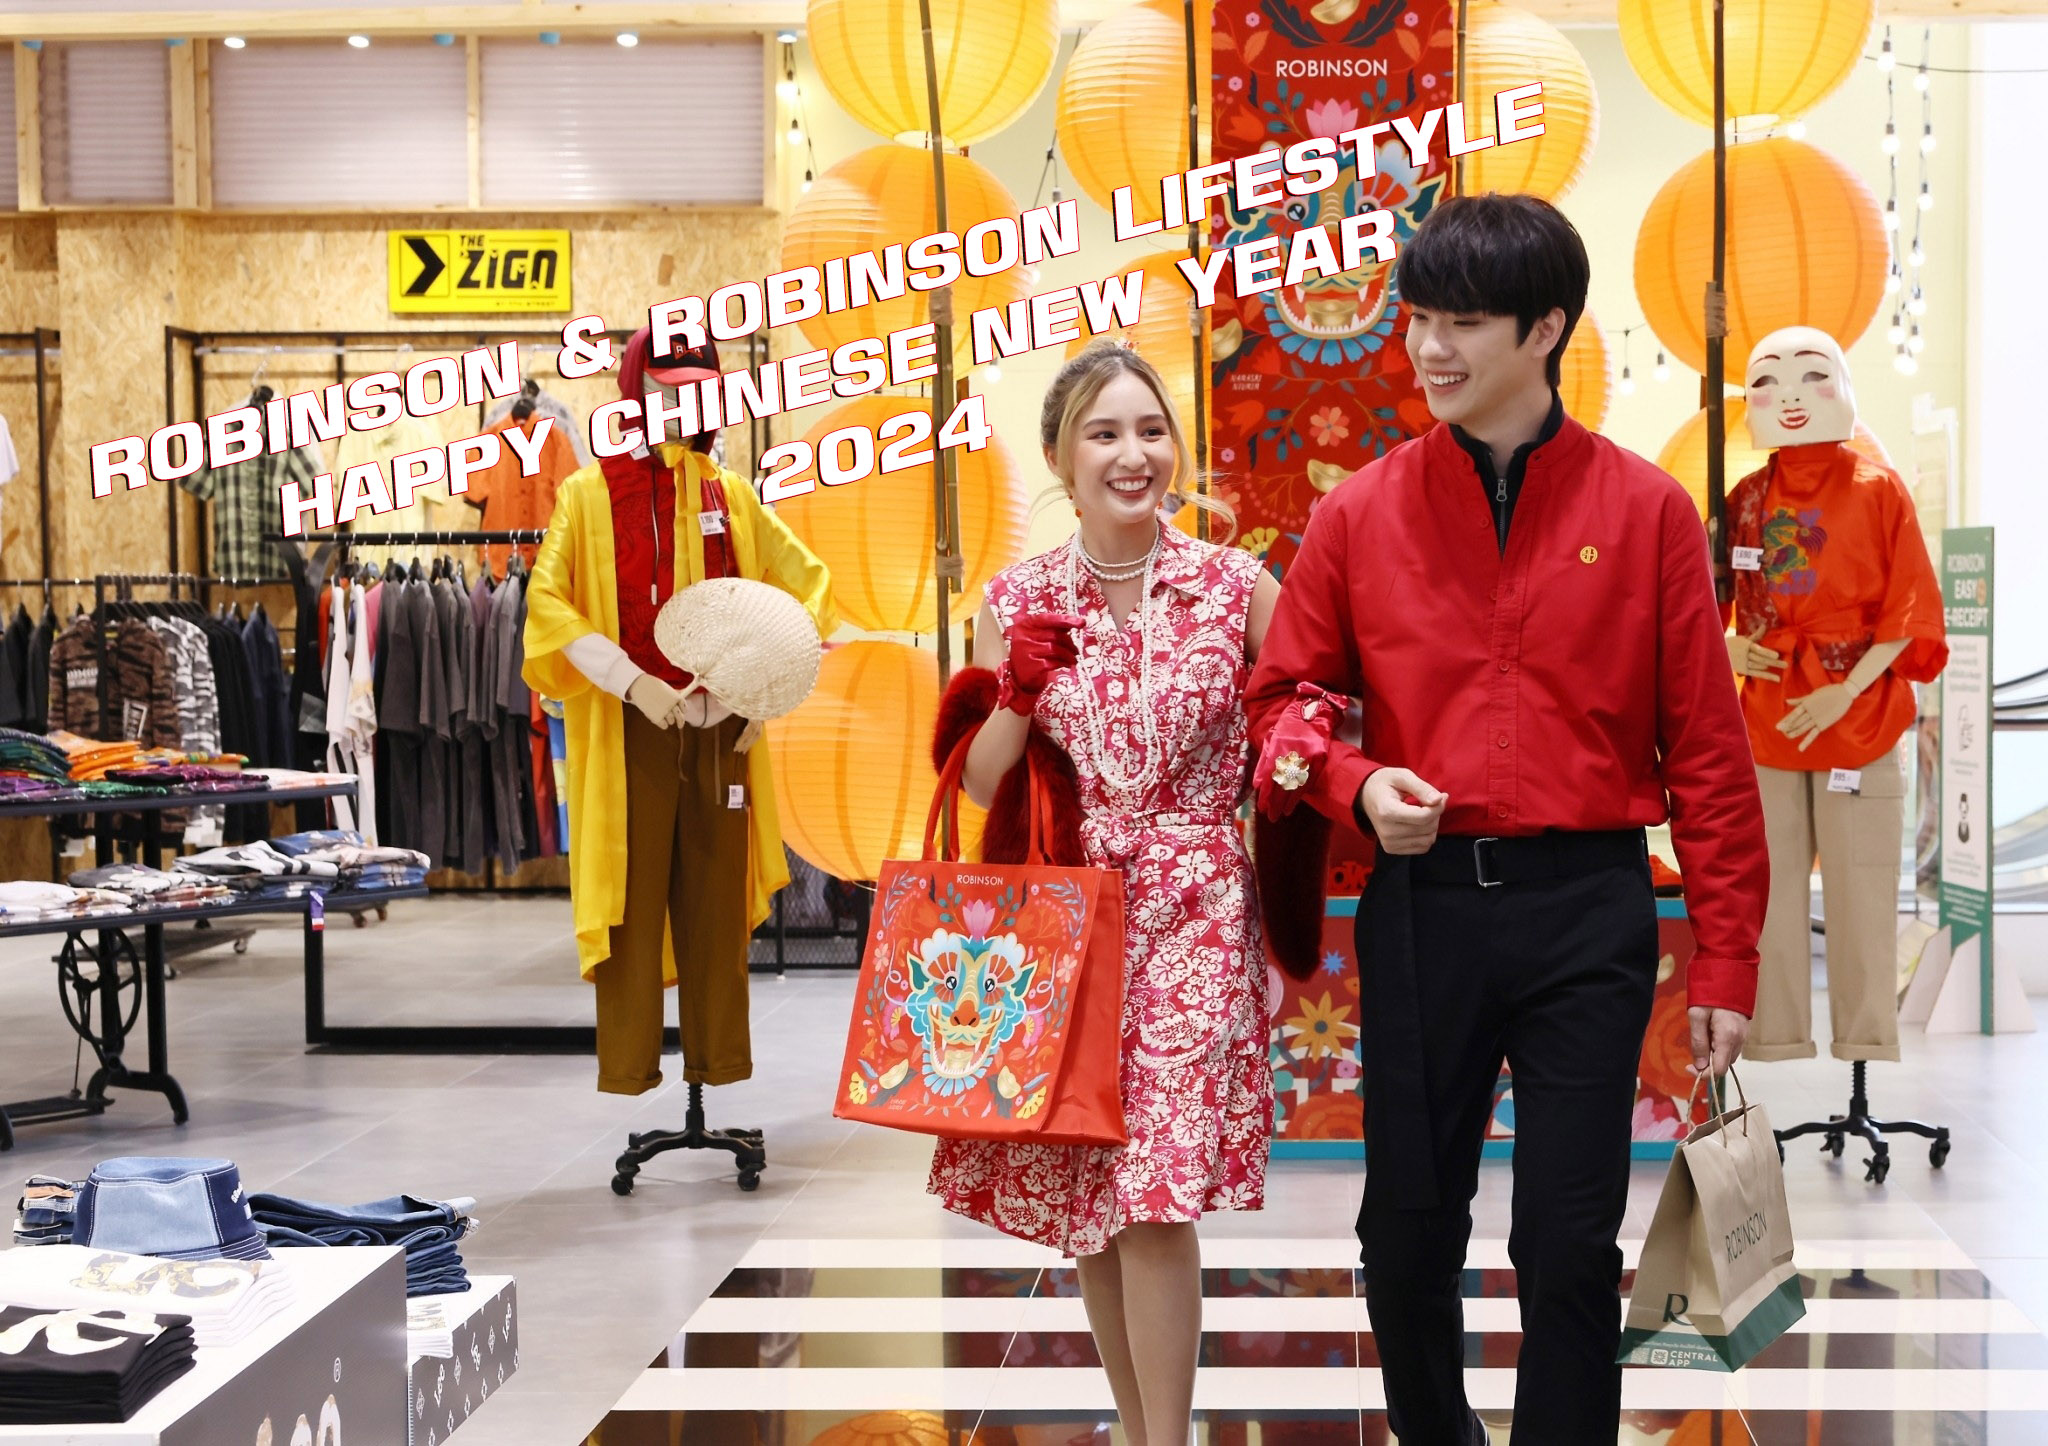 “ROBINSON& ROBINSON LIFESTYLE HAPPY CHINESE NEW YEAR 2024”